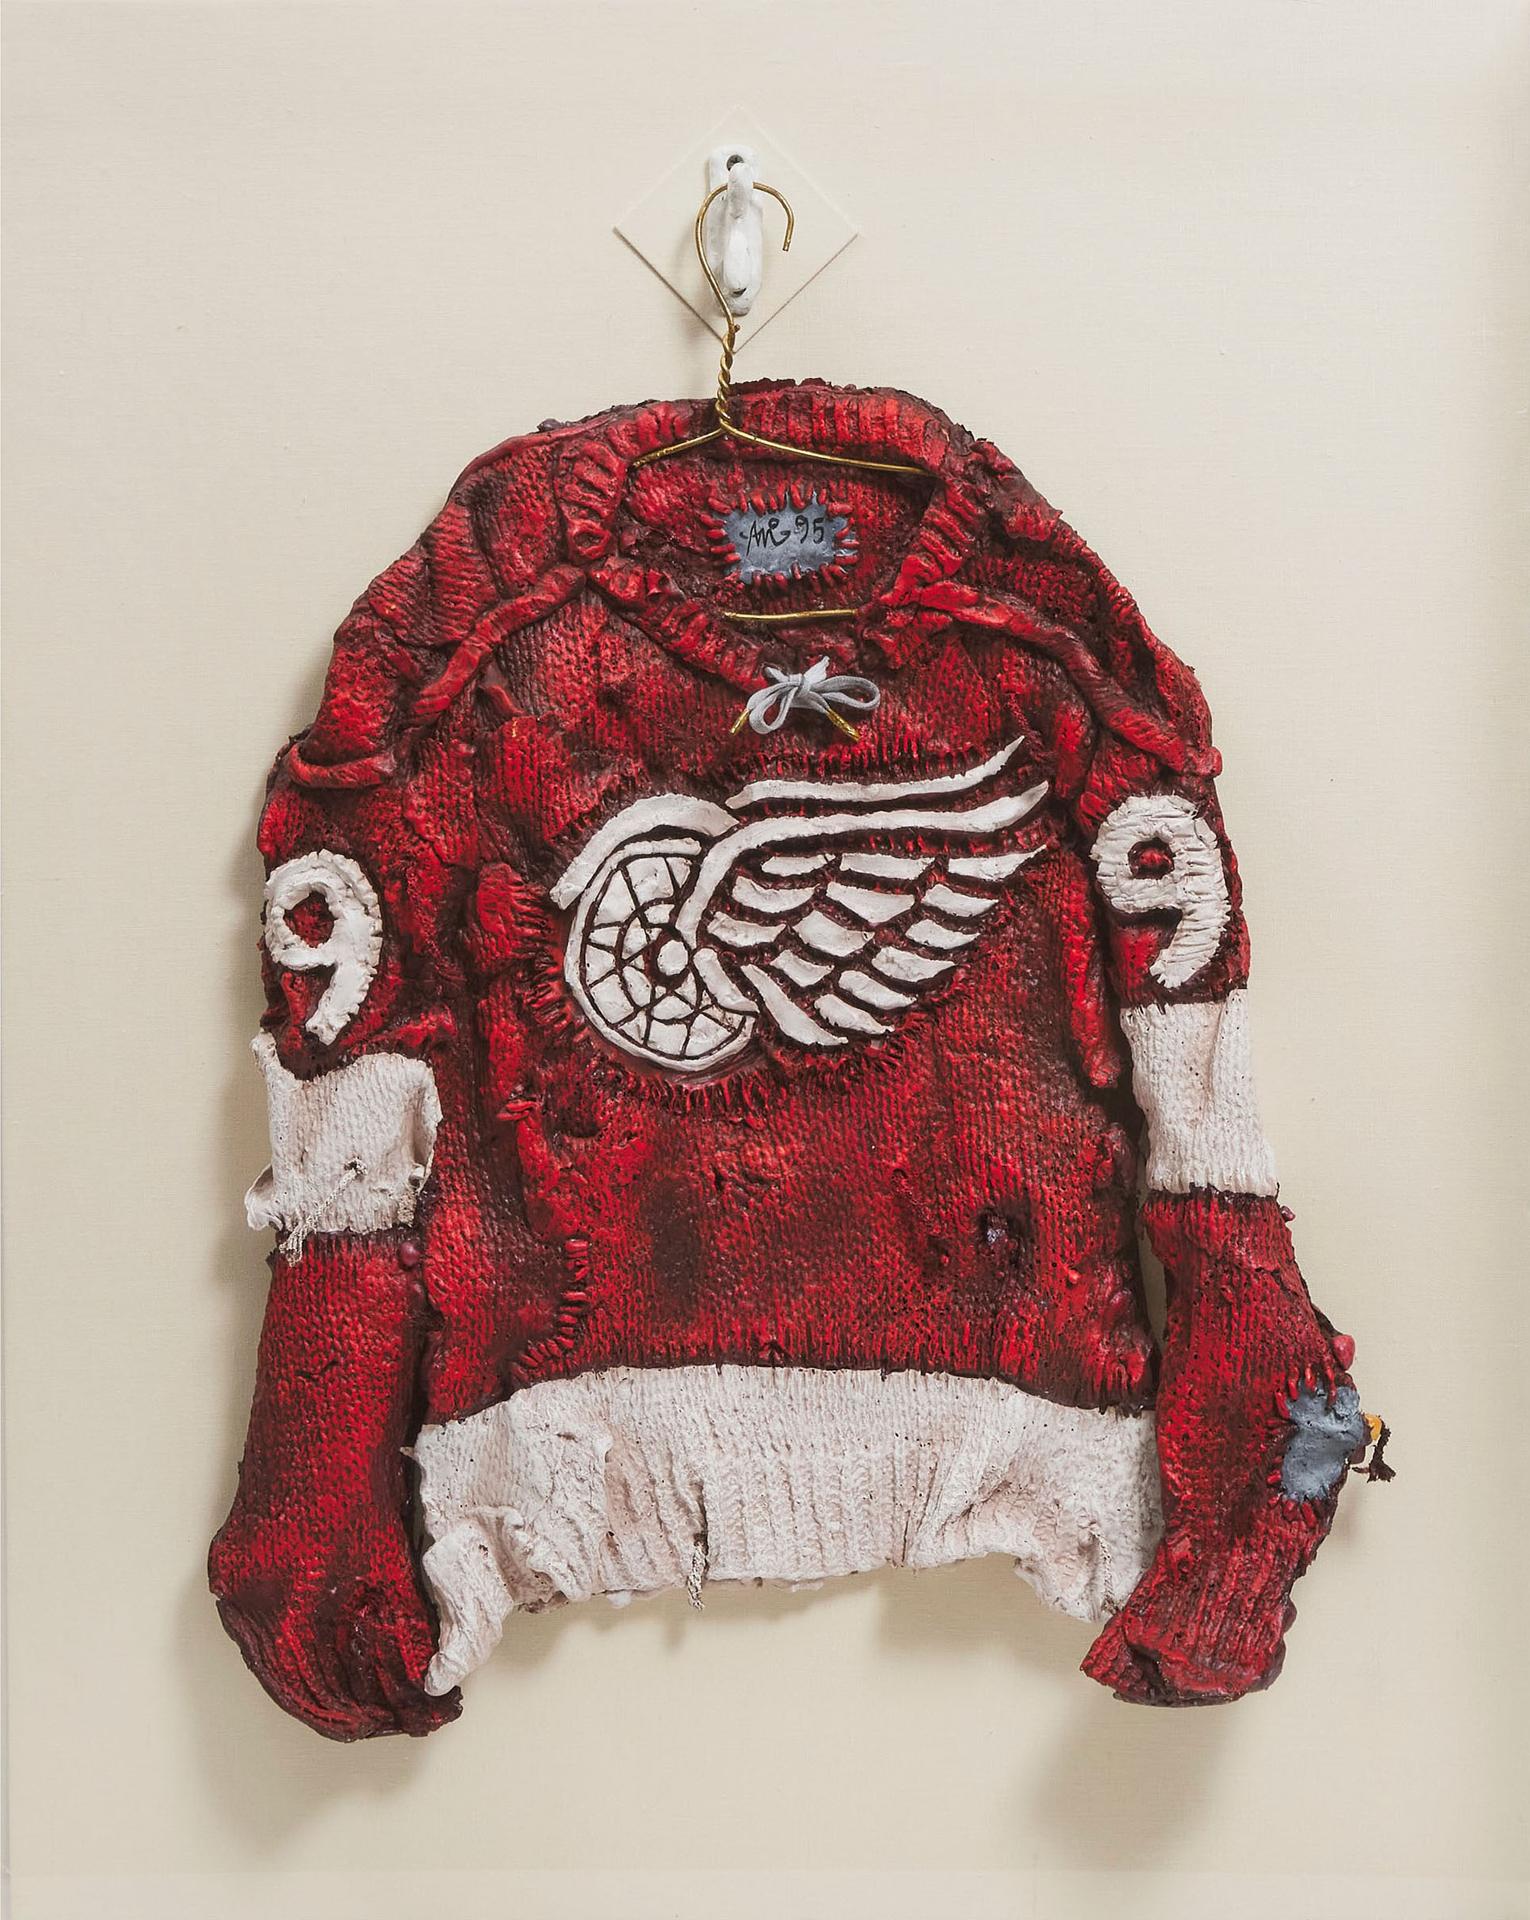 Patrick Amiot (1960) - Detroit Red Wings Jersey #9, 1995